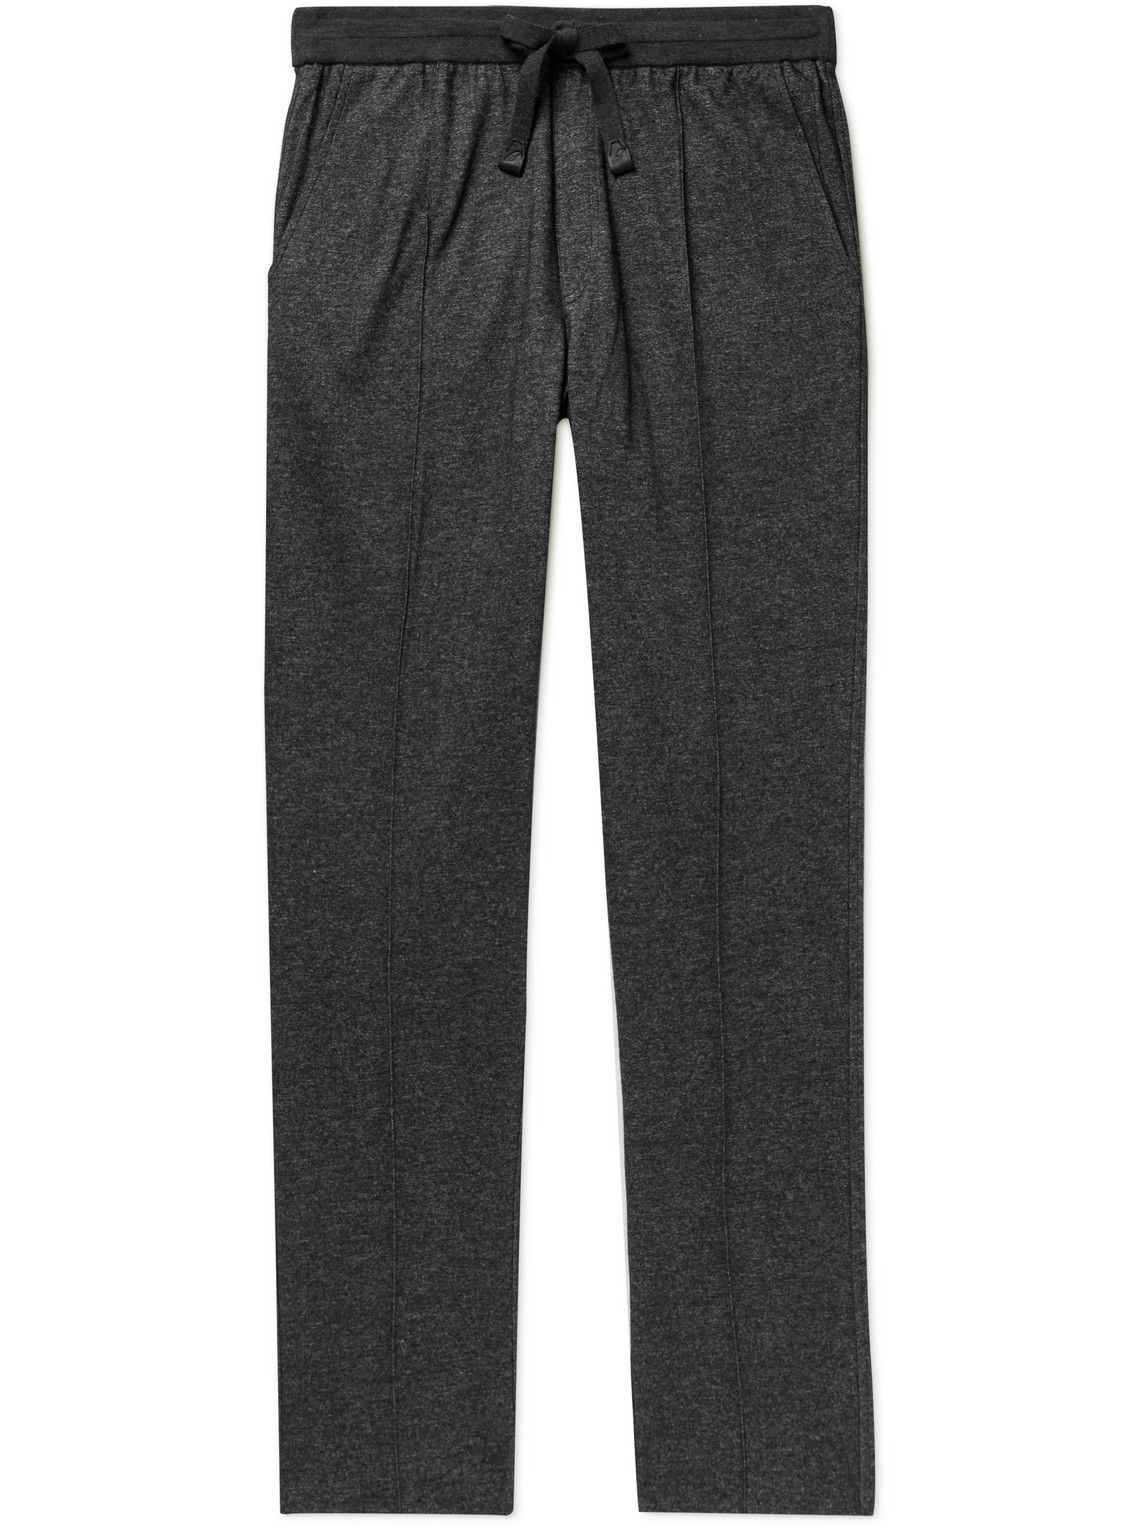 Brioni - Tapered Cashmere and Cotton-Blend Suit Trousers - Gray Brioni